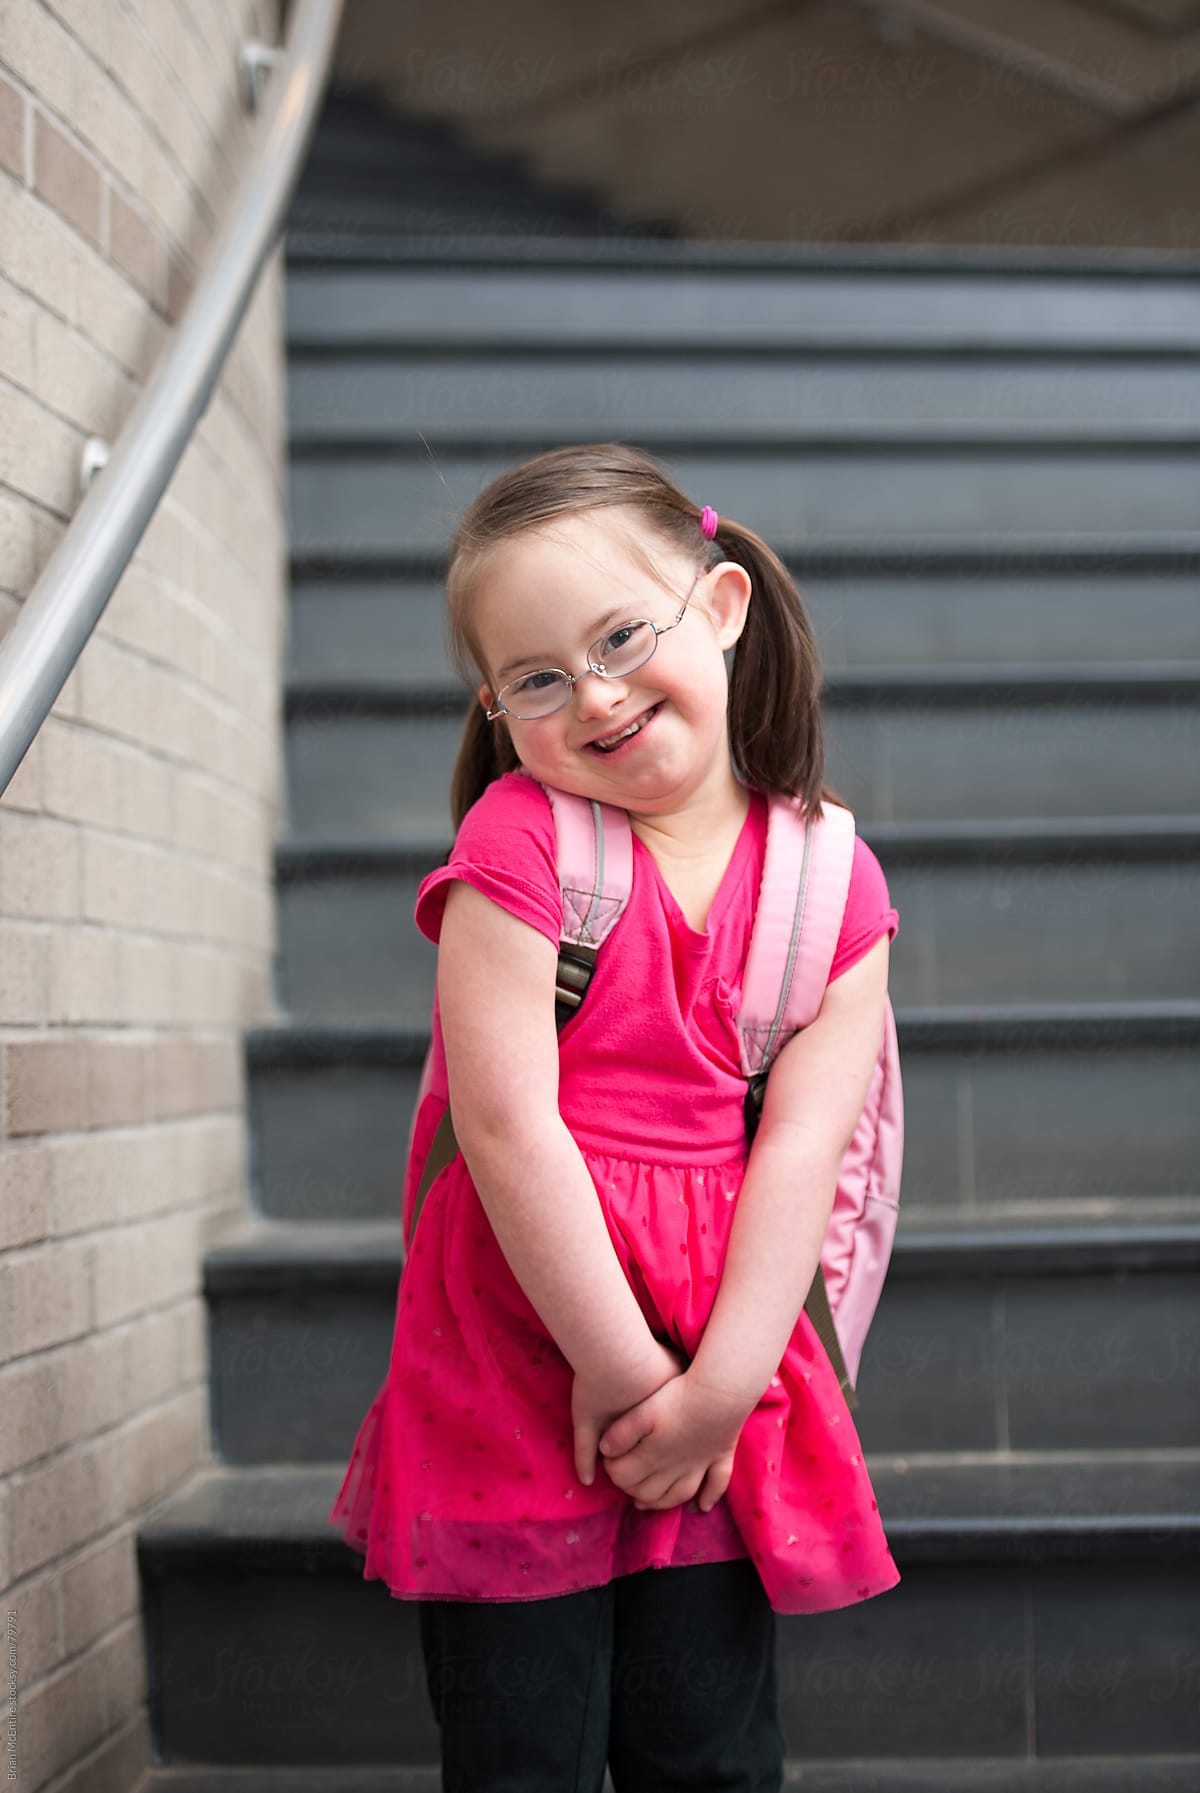 Exuberant Little Girl With Down Syndrome Smiling In School By Brian Mcentire Stocksy United